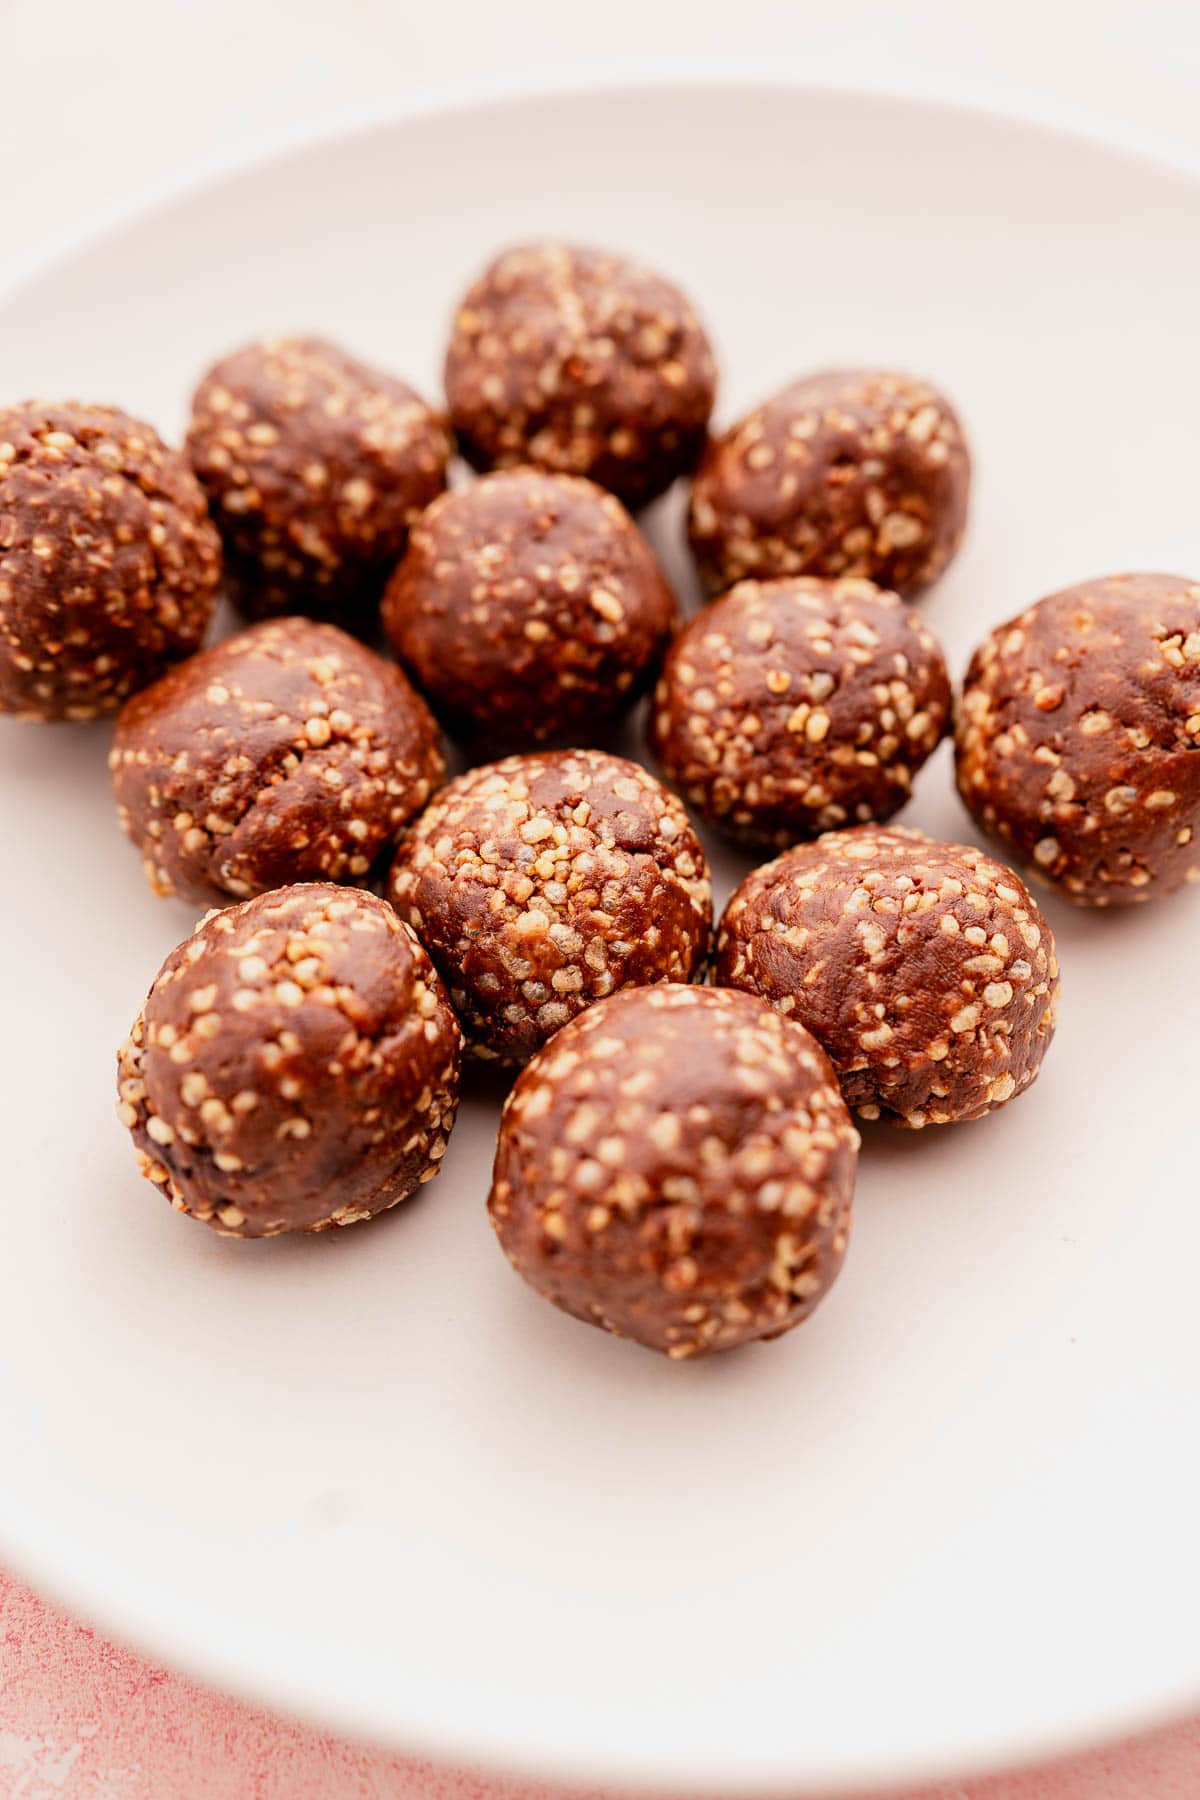 A close-up image of chocolate quinoa crunch bites arranged on a light pink plate.